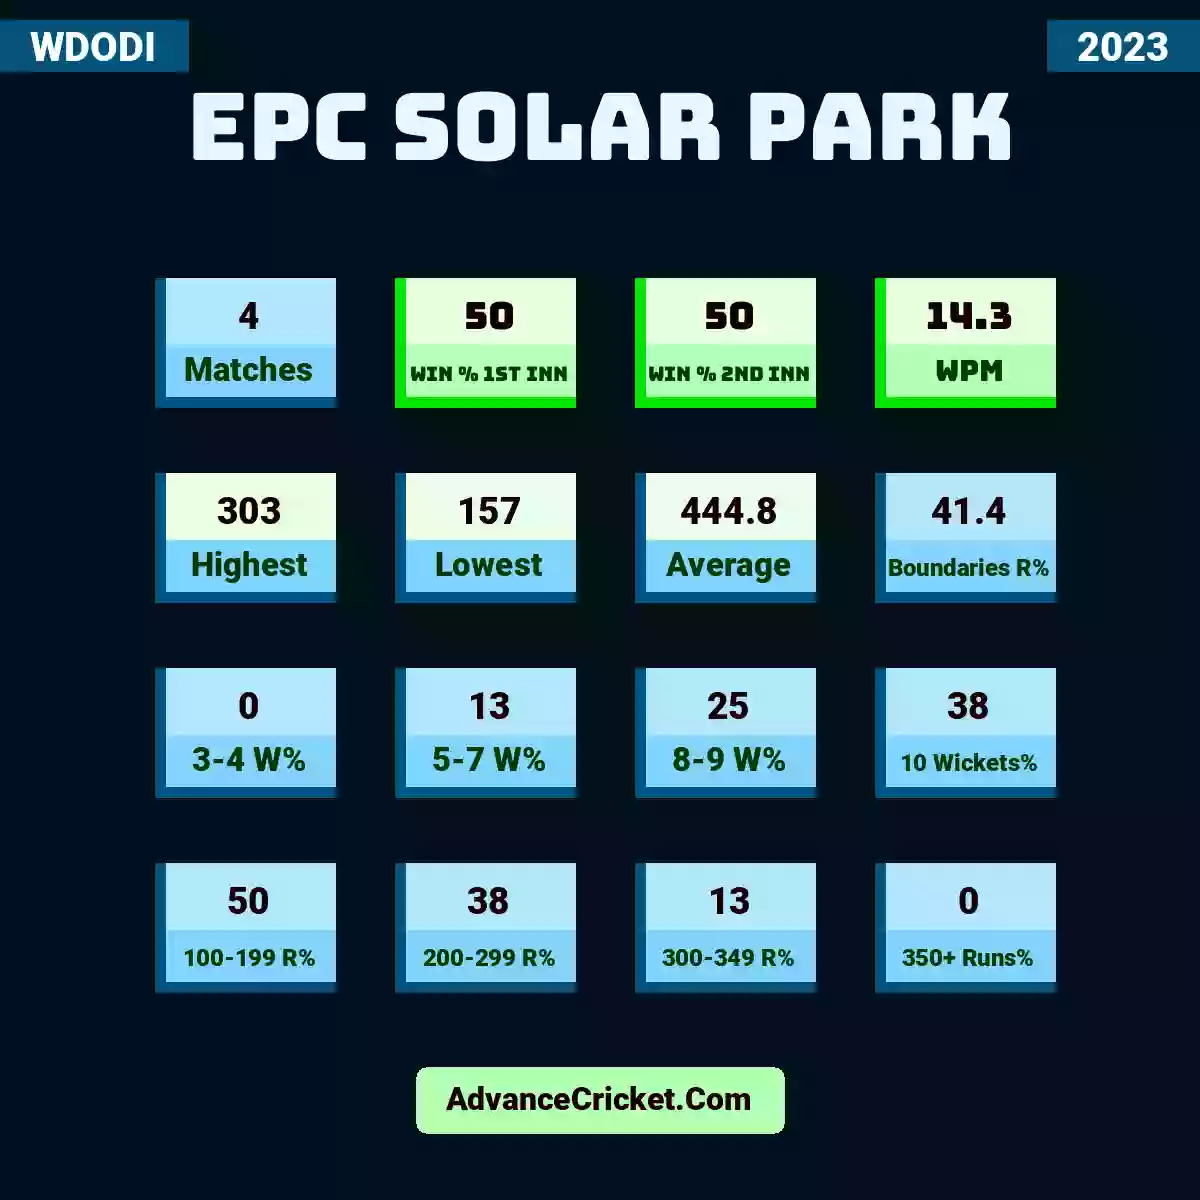 Image showing EPC Solar Park with Matches: 4, Win % 1st Inn: 50, Win % 2nd Inn: 50, WPM: 14.3, Highest: 303, Lowest: 157, Average: 444.8, Boundaries R%: 41.4, 3-4 W%: 0, 5-7 W%: 13, 8-9 W%: 25, 10 Wickets%: 38, 100-199 R%: 50, 200-299 R%: 38, 300-349 R%: 13, 350+ Runs%: 0.